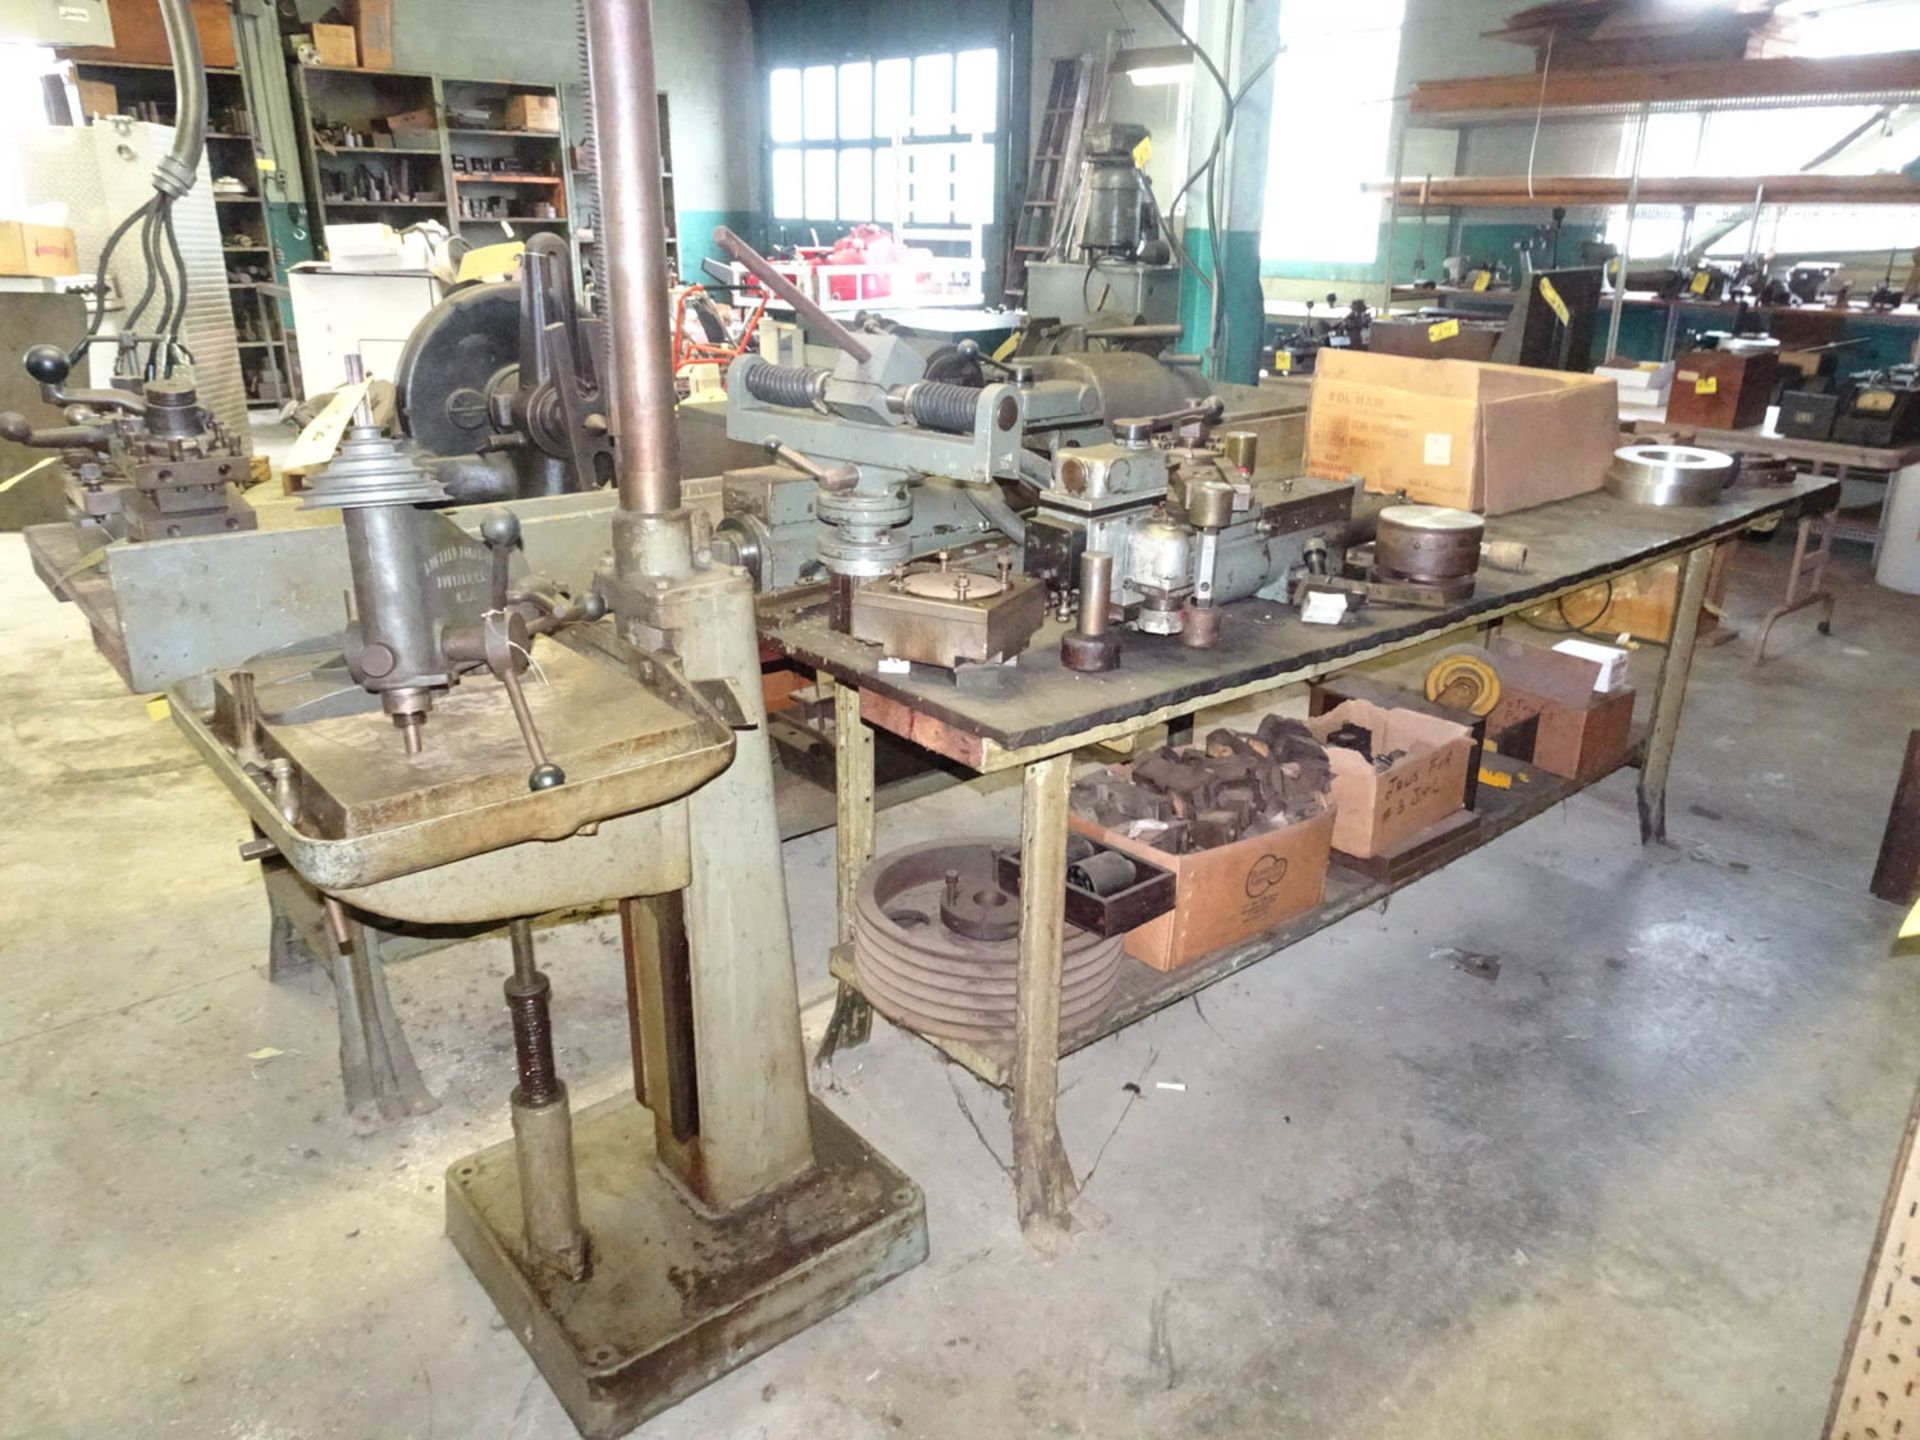 (2) STEEL FRAMED WOOD TOP WORK BENCHES WITH CONTENTS, INCLUDING: TRACER MACHINE PARTS, THREAD